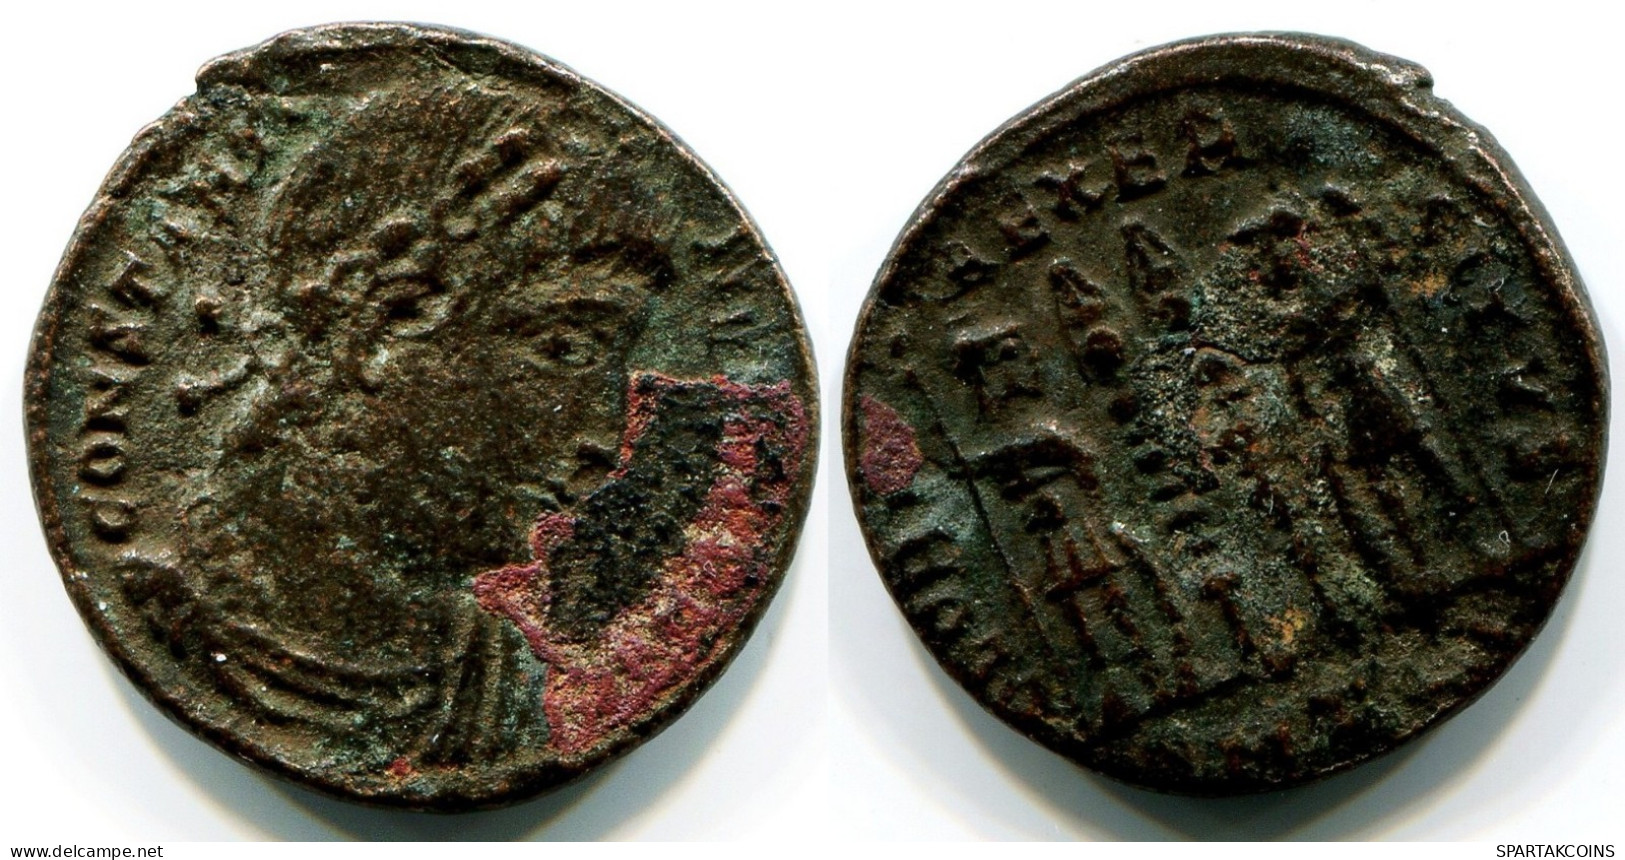 CONSTANTINE I THESSALONICA FROM THE ROYAL ONTARIO MUSEUM #ANC11131.14.E.A - El Impero Christiano (307 / 363)